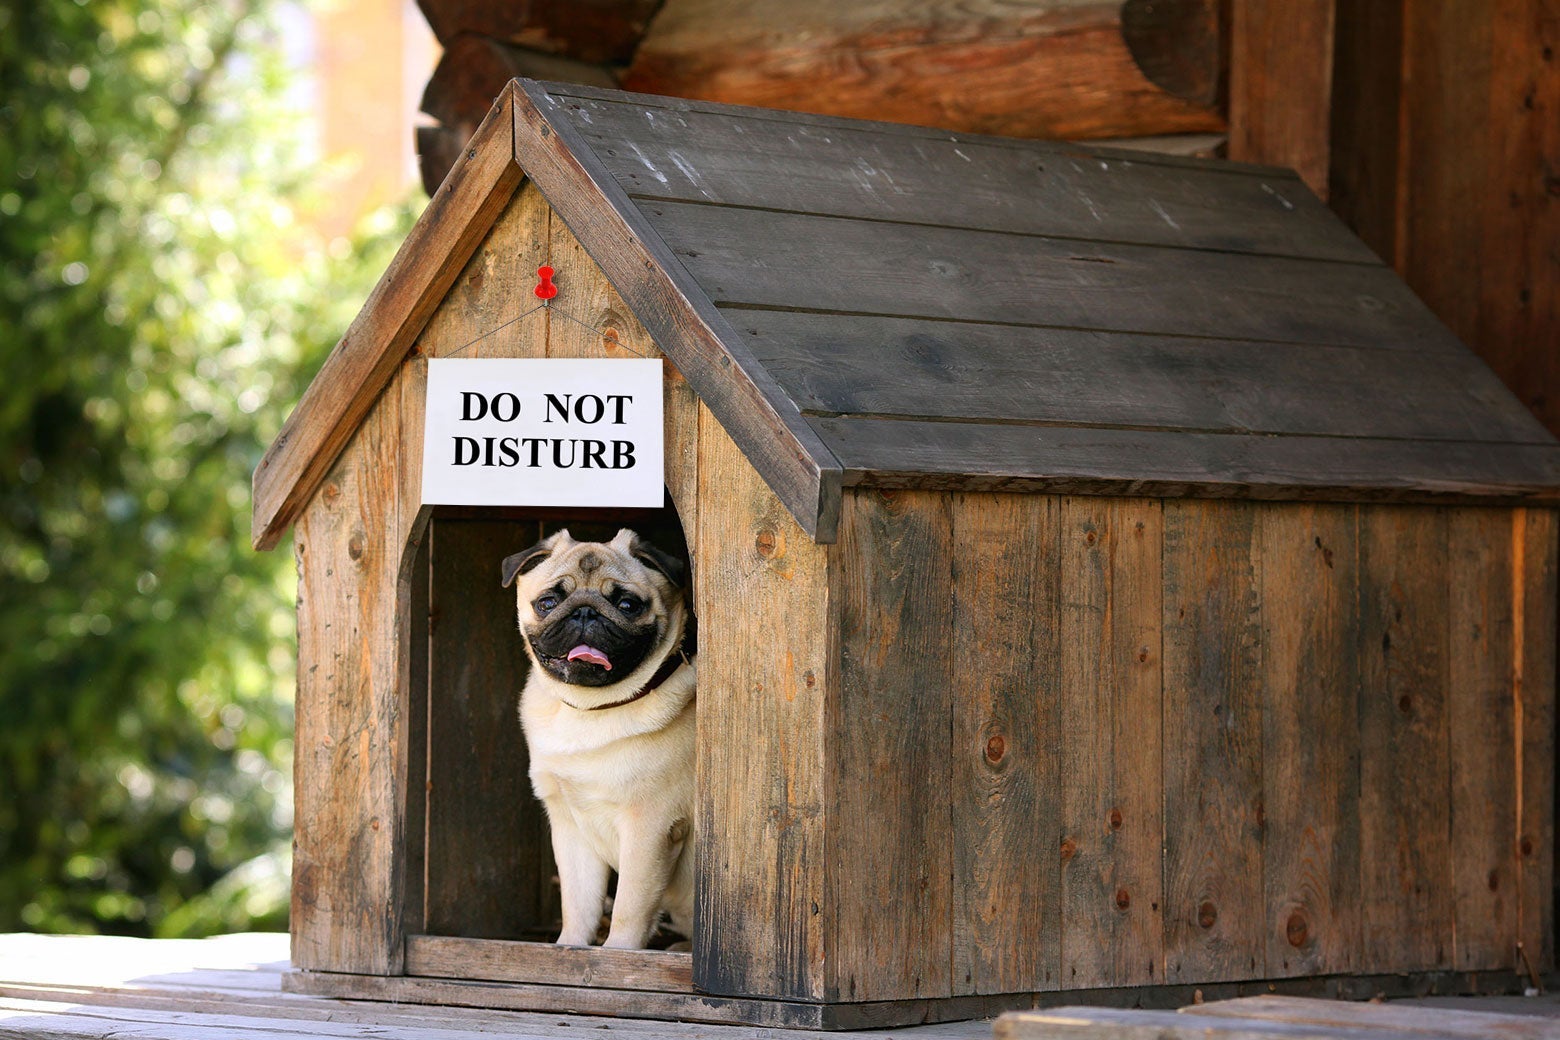 A dog peeks out of a doghouse that has a "Do Not Disturb" sign hanging over it.